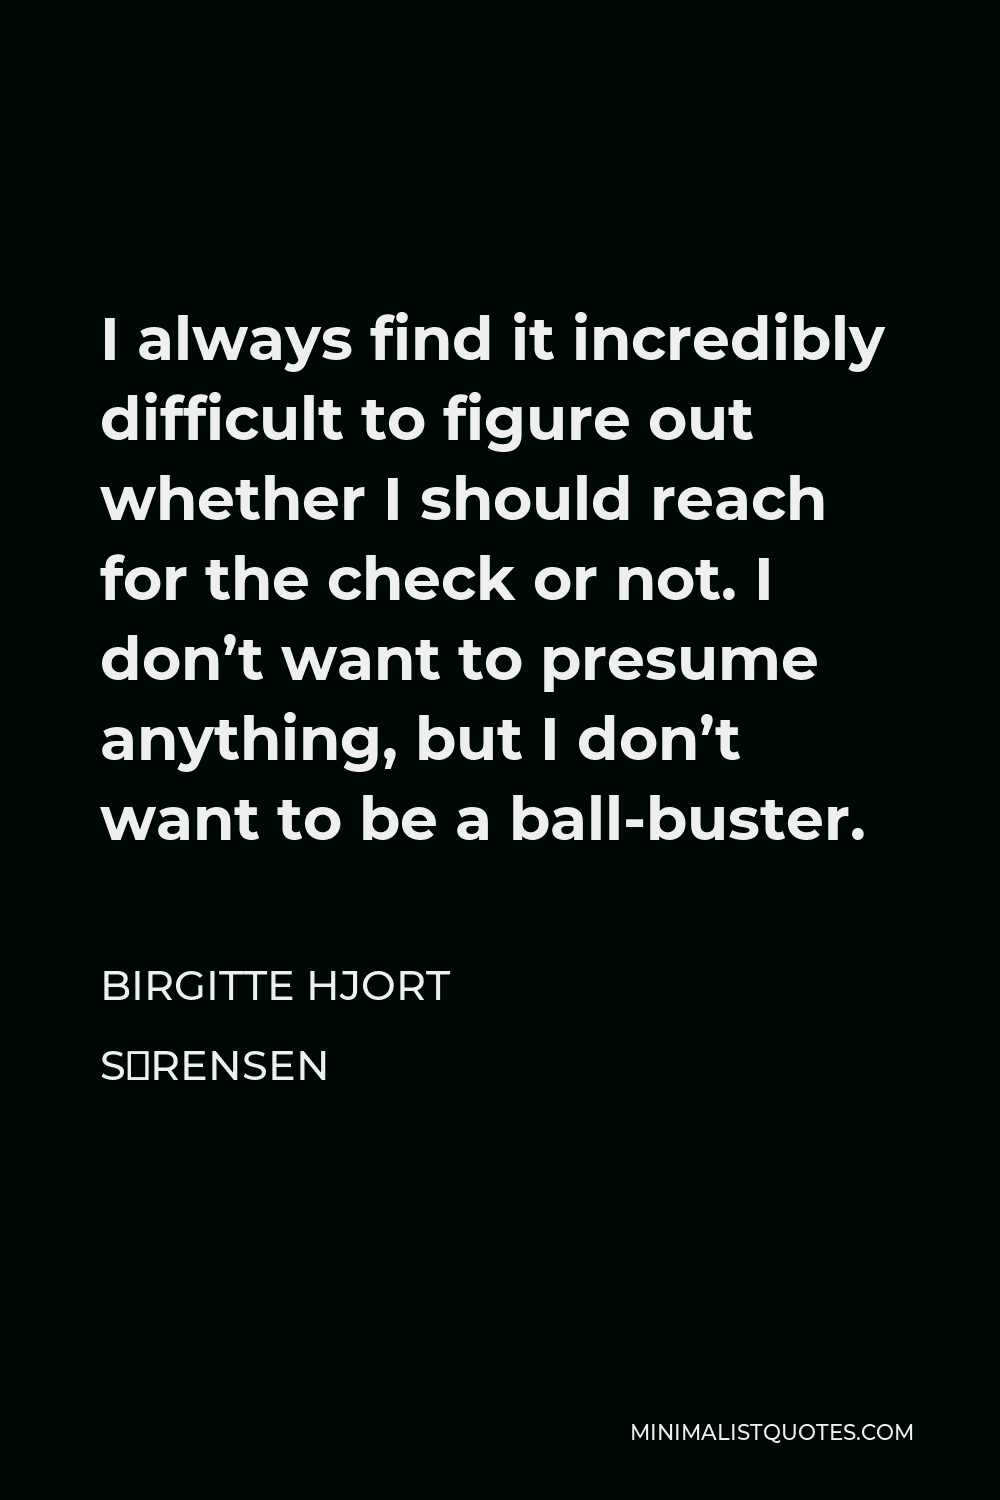 Birgitte Hjort Sørensen Quote - I always find it incredibly difficult to figure out whether I should reach for the check or not. I don’t want to presume anything, but I don’t want to be a ball-buster.